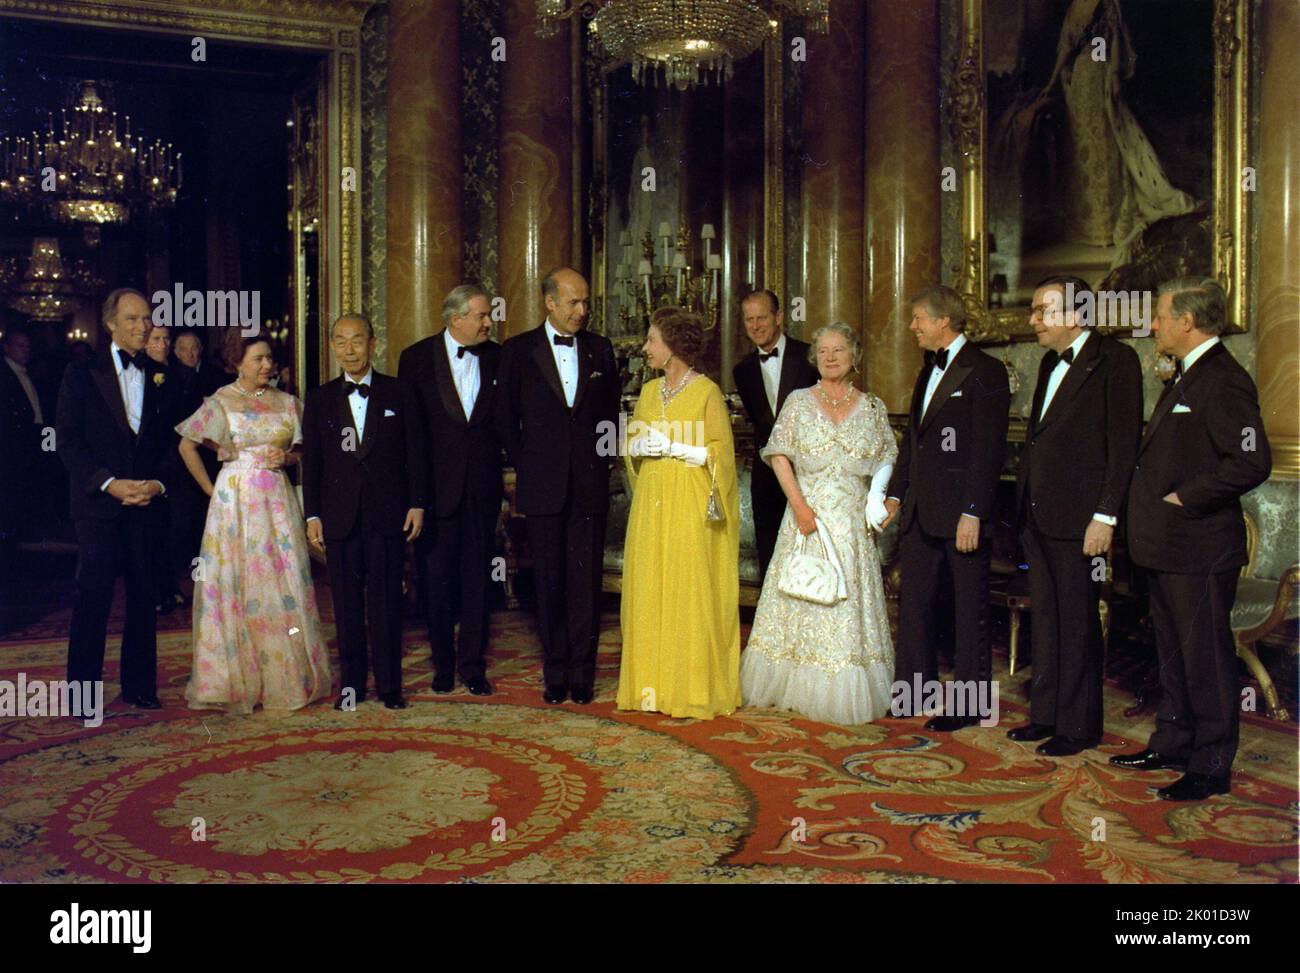 Jimmy Carter with Queen Elizabeth - White House Staff Photographers 1977 - National leaders and royalty in London, 1977. Left to right: Pierre Trudeau, (Prince Charles far background), Princess Margaret, Takeo Fukuda, James Callaghan, Valéry Giscard d'Estaing, Queen Elizabeth II, Prince Philip, Queen Elizabeth The Queen Mother, Jimmy Carter, Giulio Andreotti, Helmut Schmidt. Stock Photo